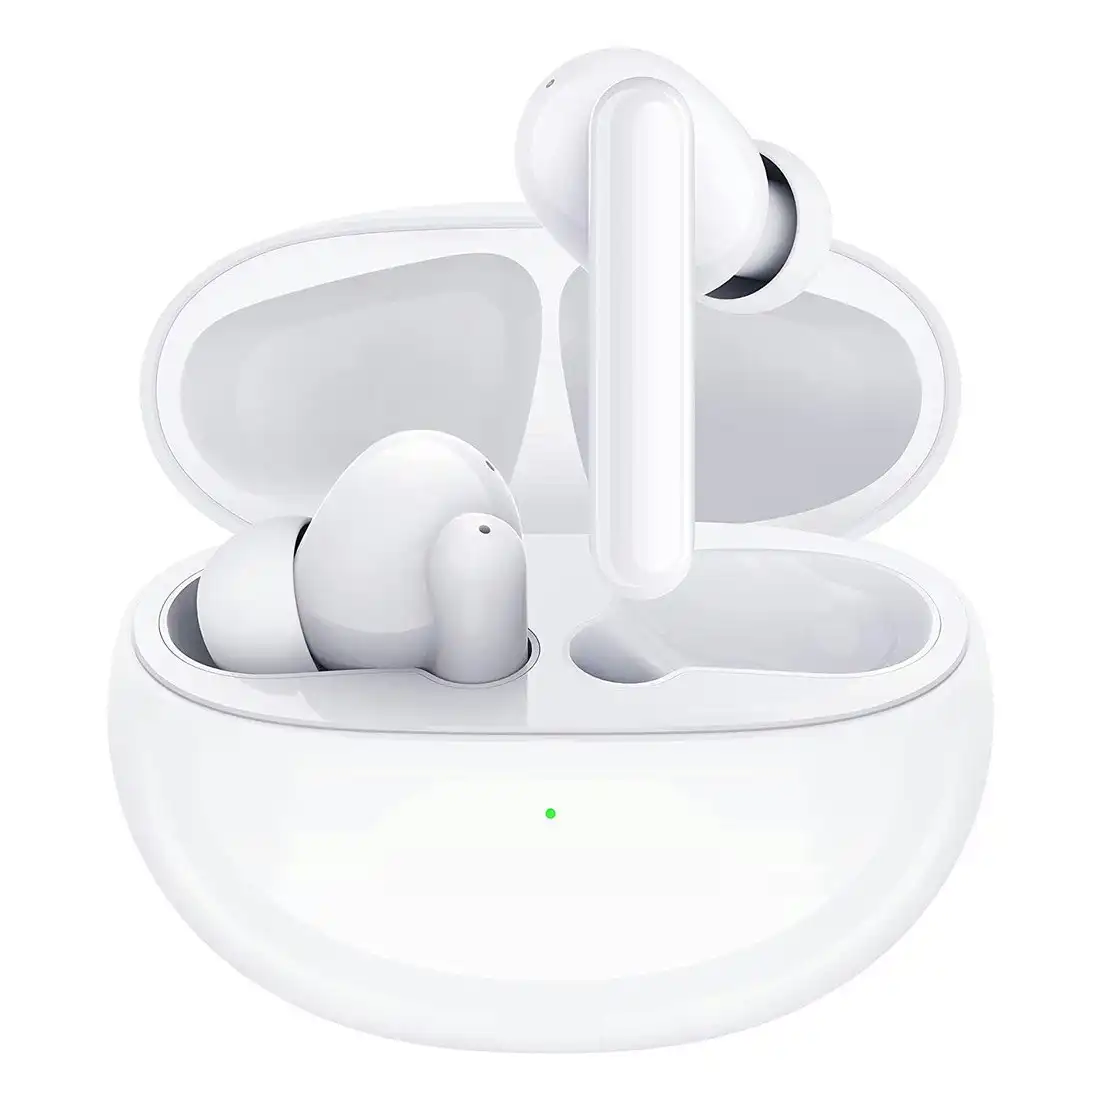 TCL MOVEAUDIO S600 Wireless Earbuds TW30-3BLCEU4 - White